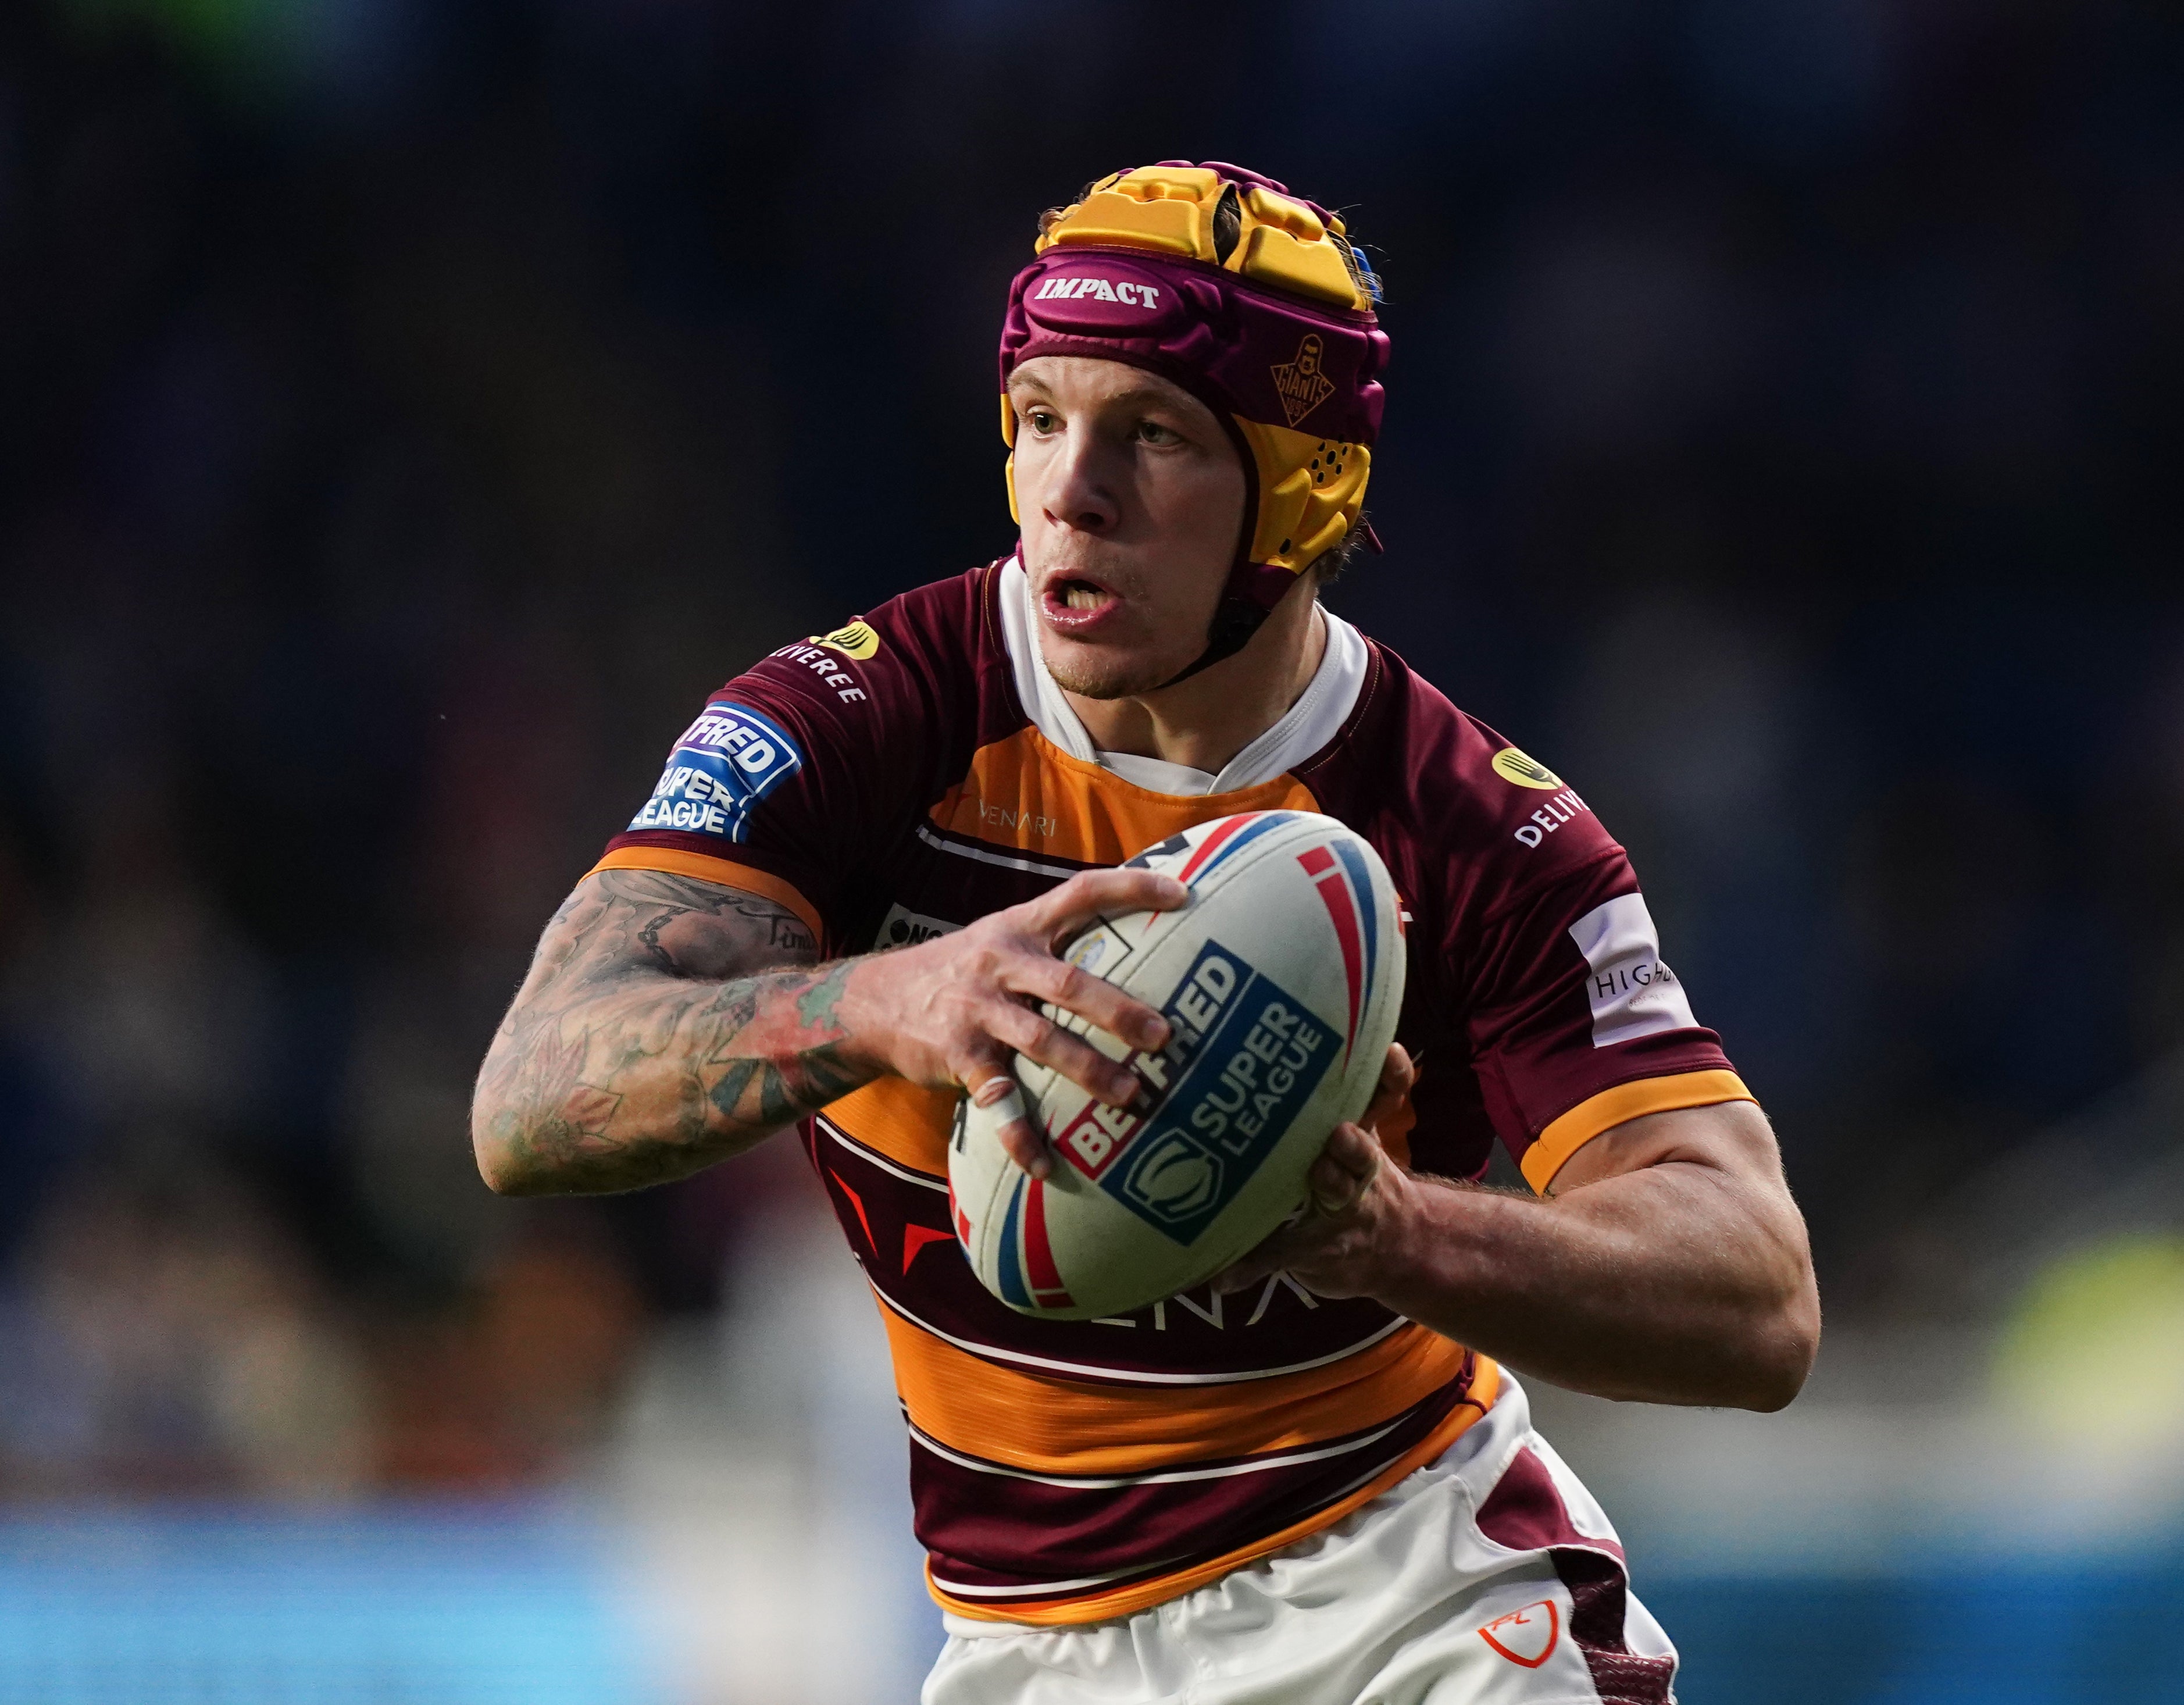 Theo Fages has played a key role in the Giants’ transformation (PA Images/Mike Egerton)